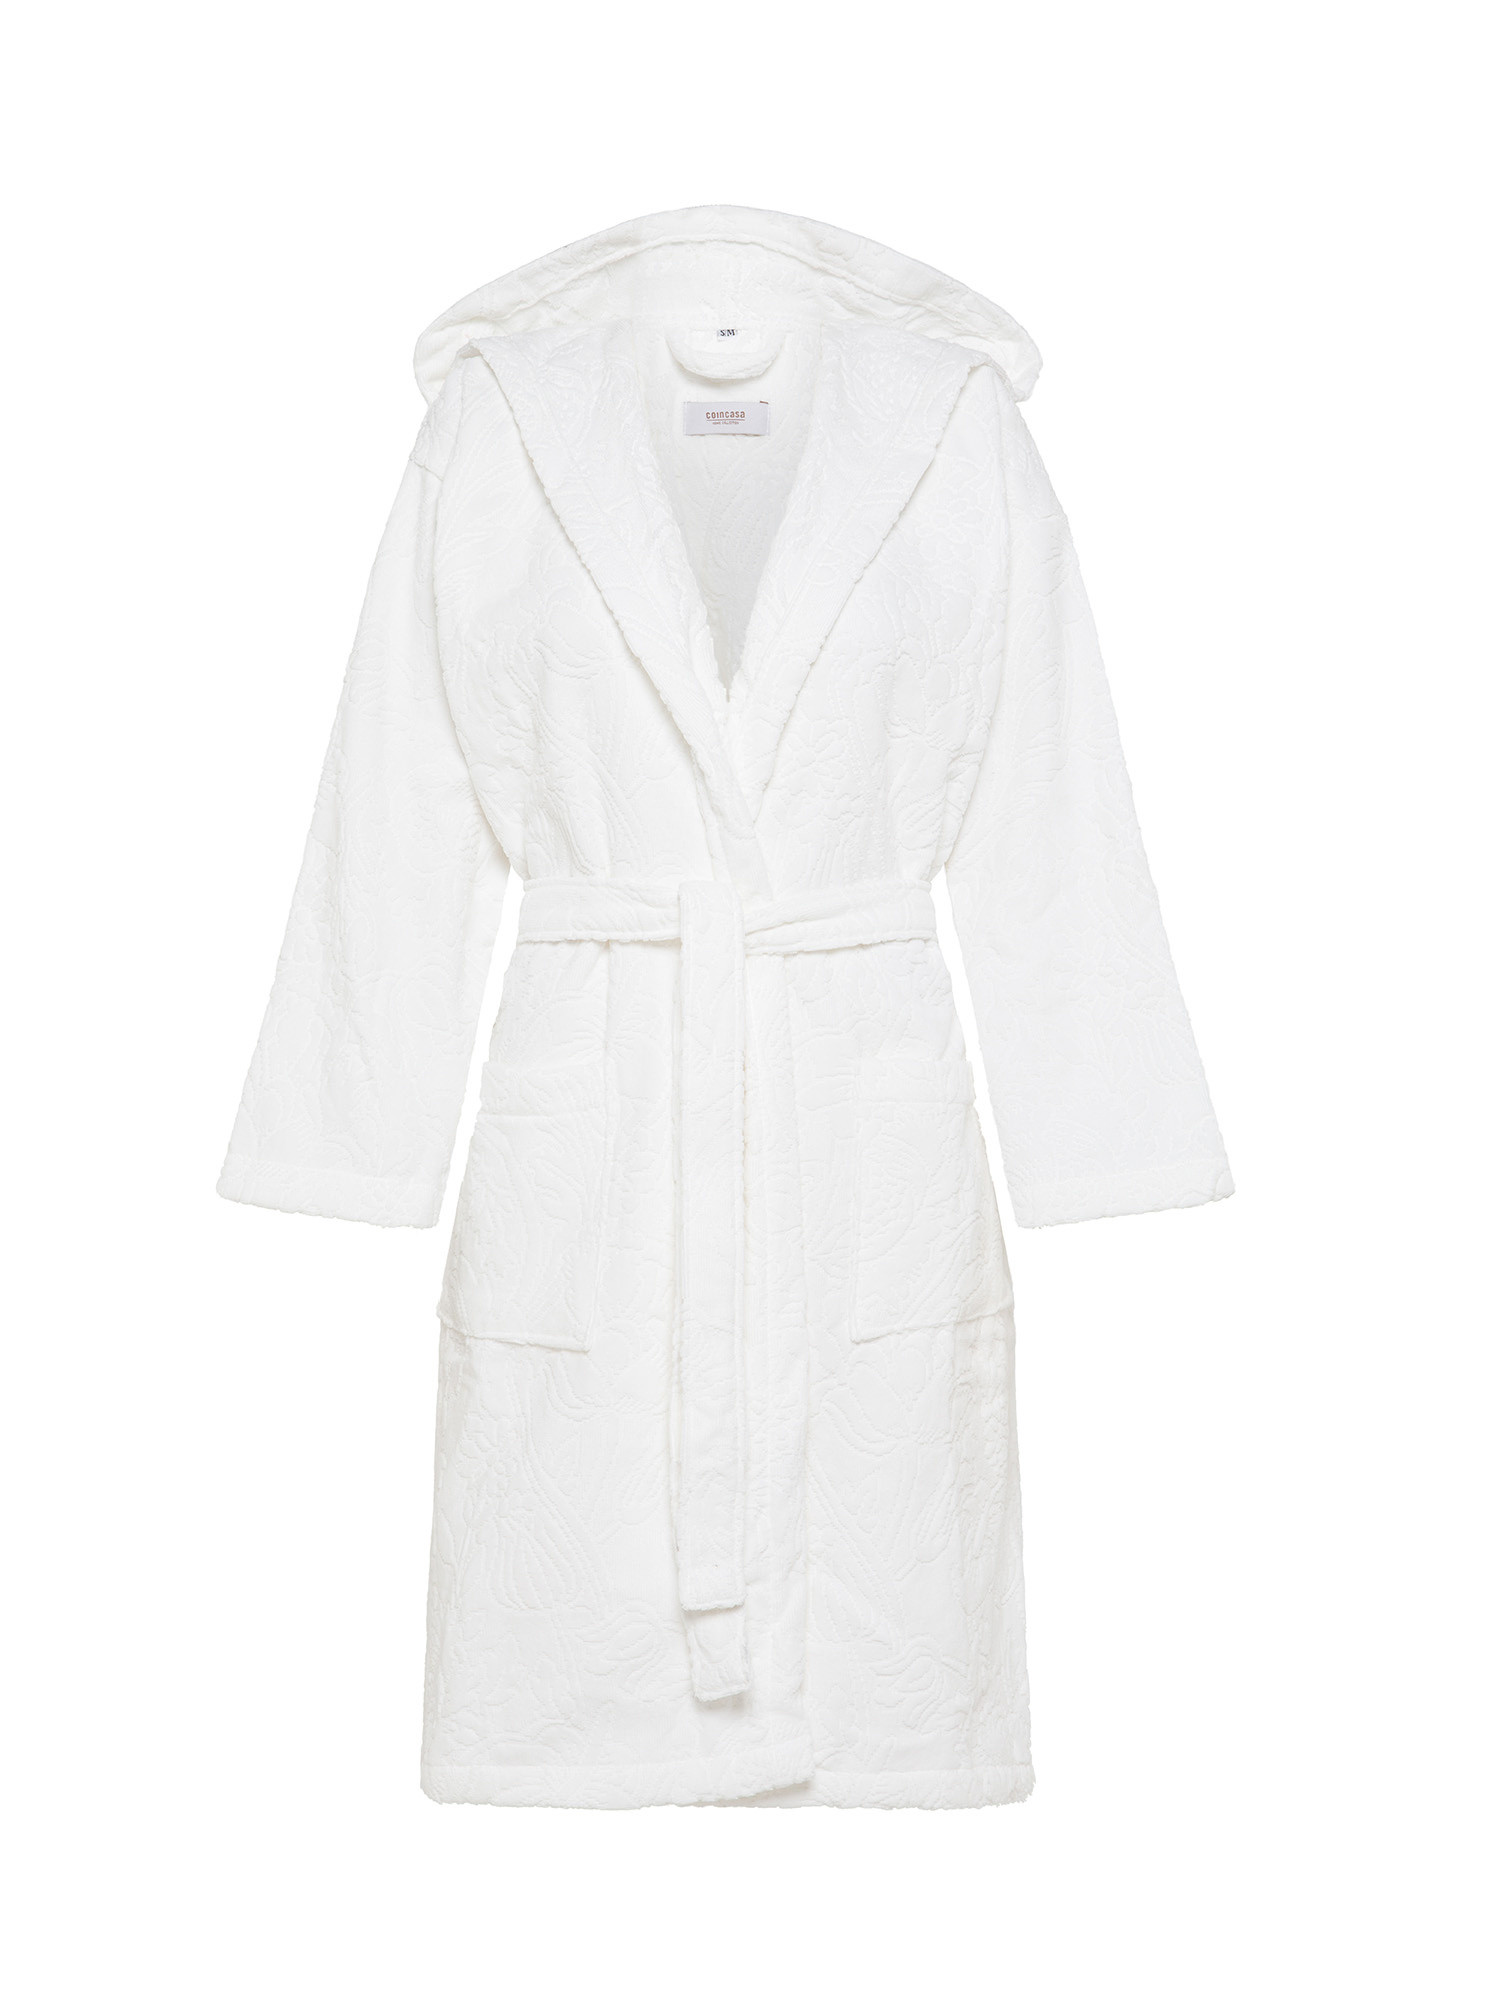 Solid color pure cotton hooded bathrobe with flower pattern, White, large image number 0